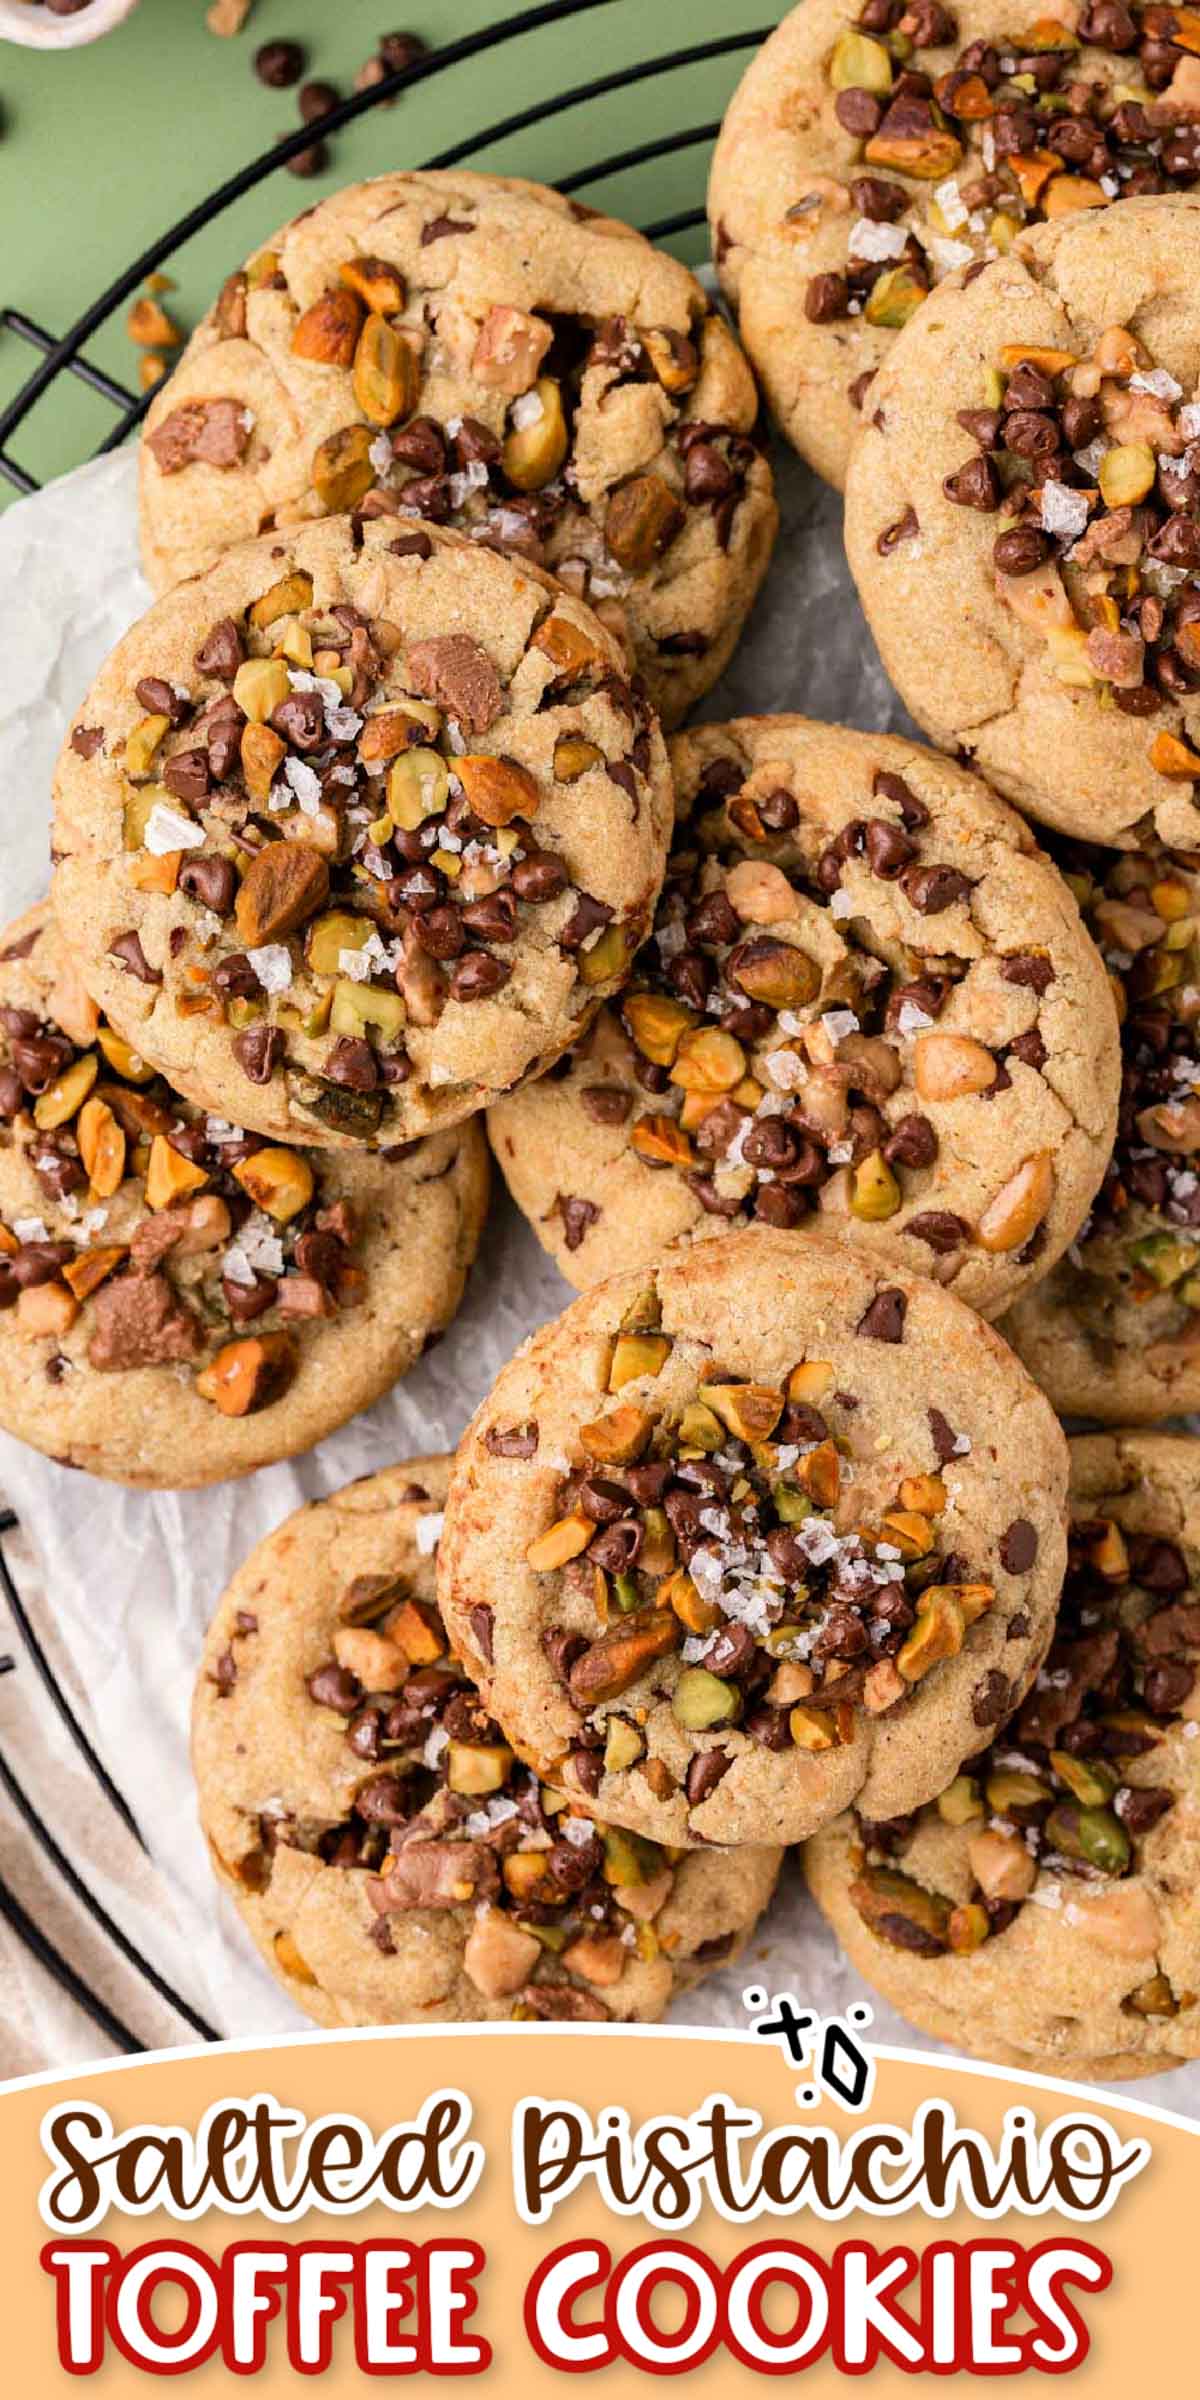 You will love these oversized Salted Pistachio Toffee Chocolate Chip Cookies loaded with salty, sweet flavor! A Gideon's Bakehouse favorite you can make right at home in under an hour using simple ingredients! via @sugarandsoulco